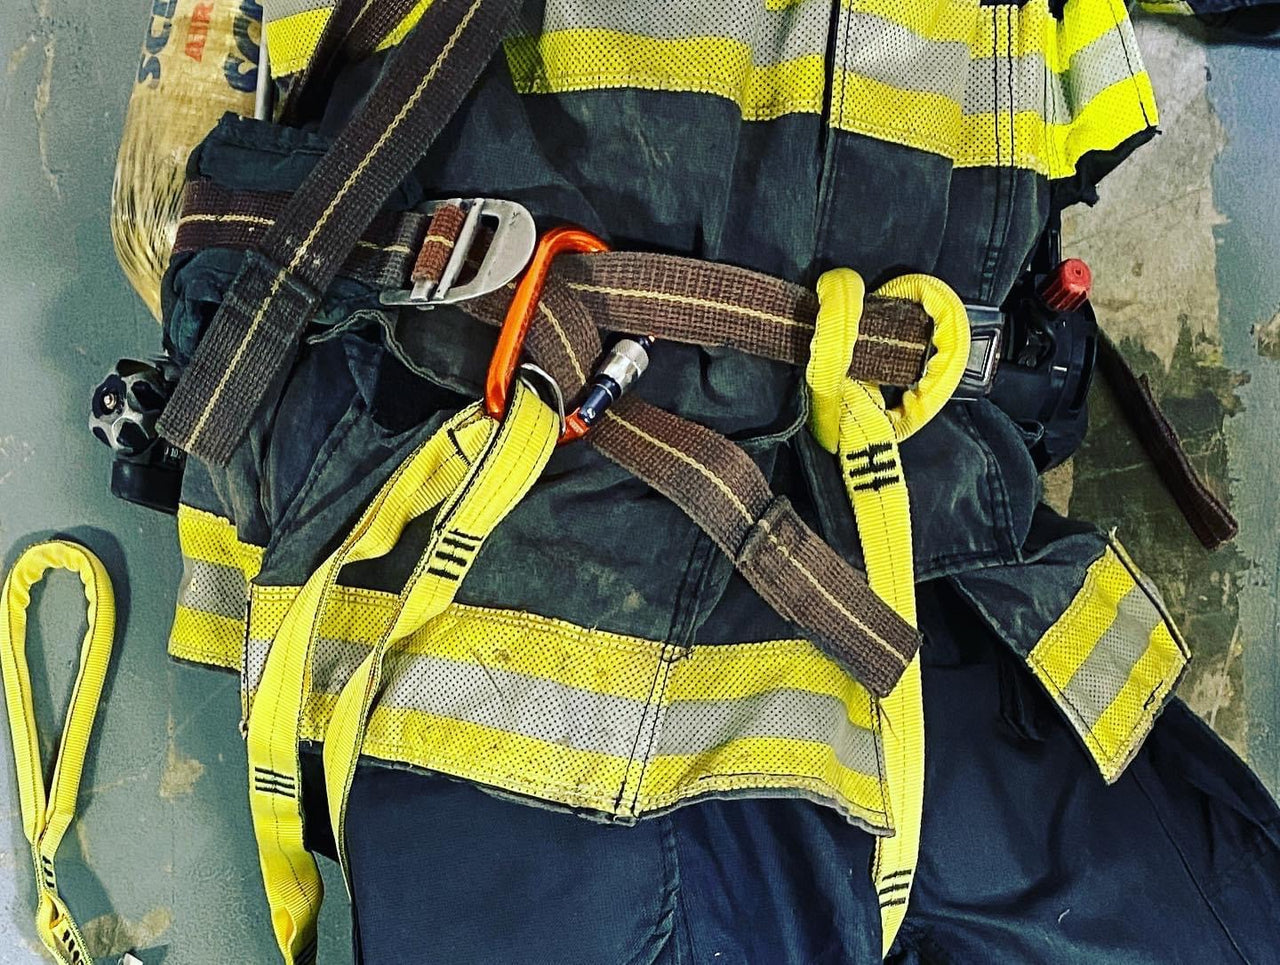 Anderson Rescue Strap (ARS) is